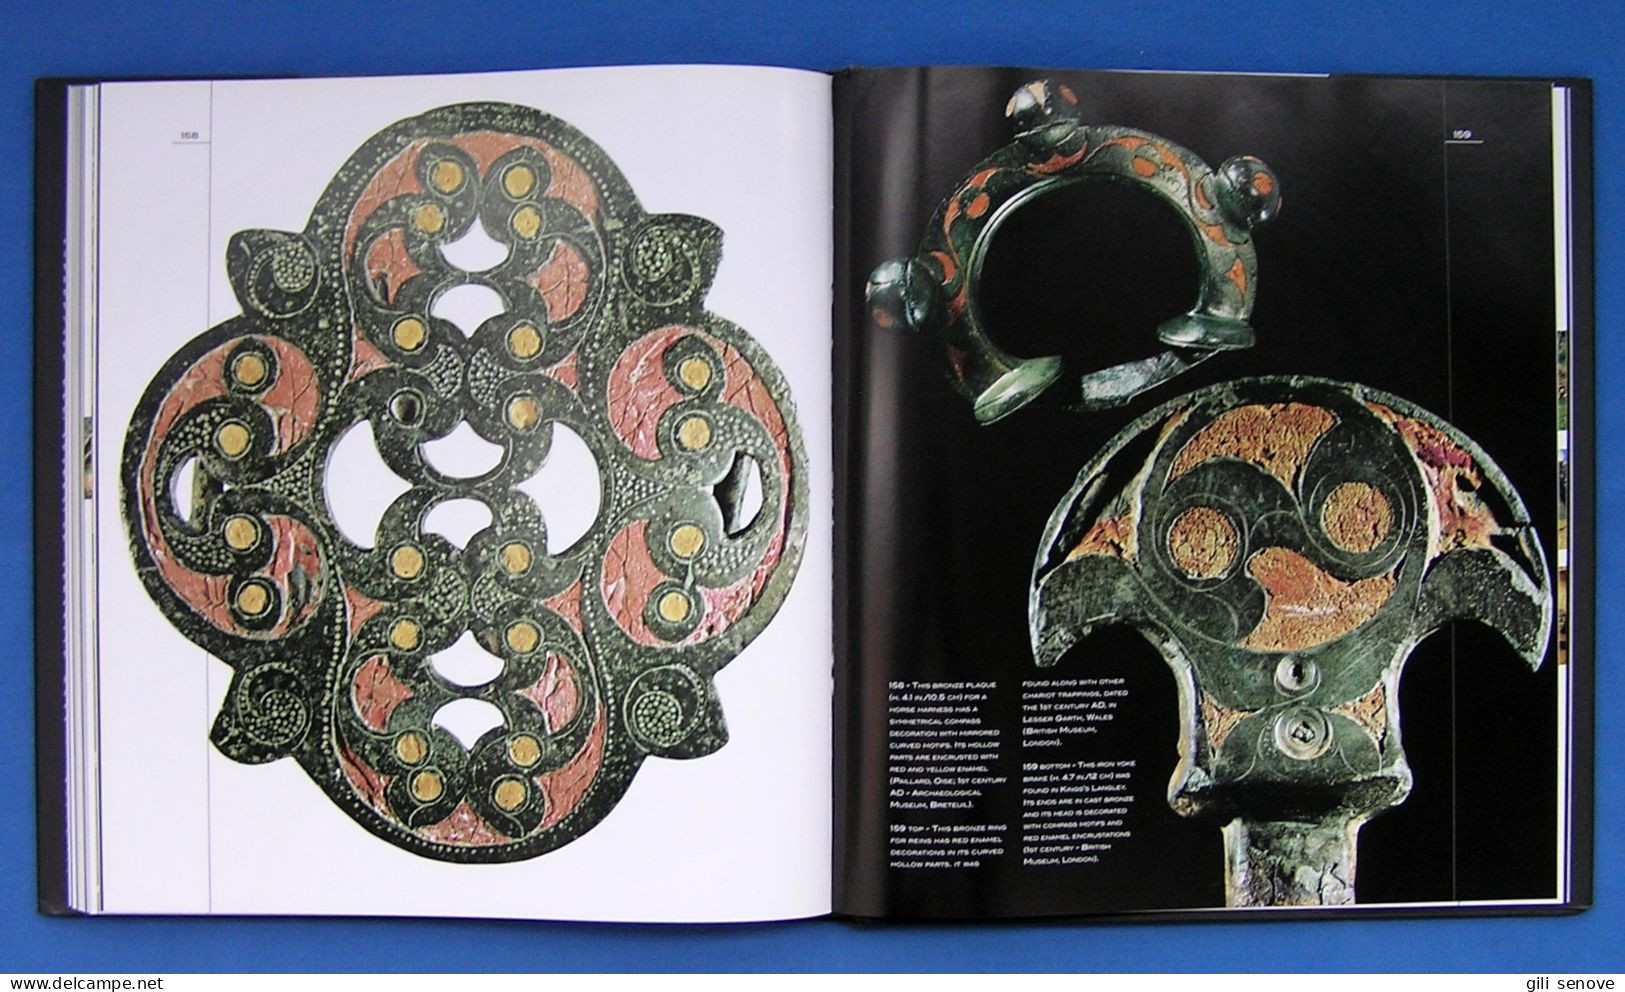 The Celts: History and Treasures of an Ancient Civilization 2007